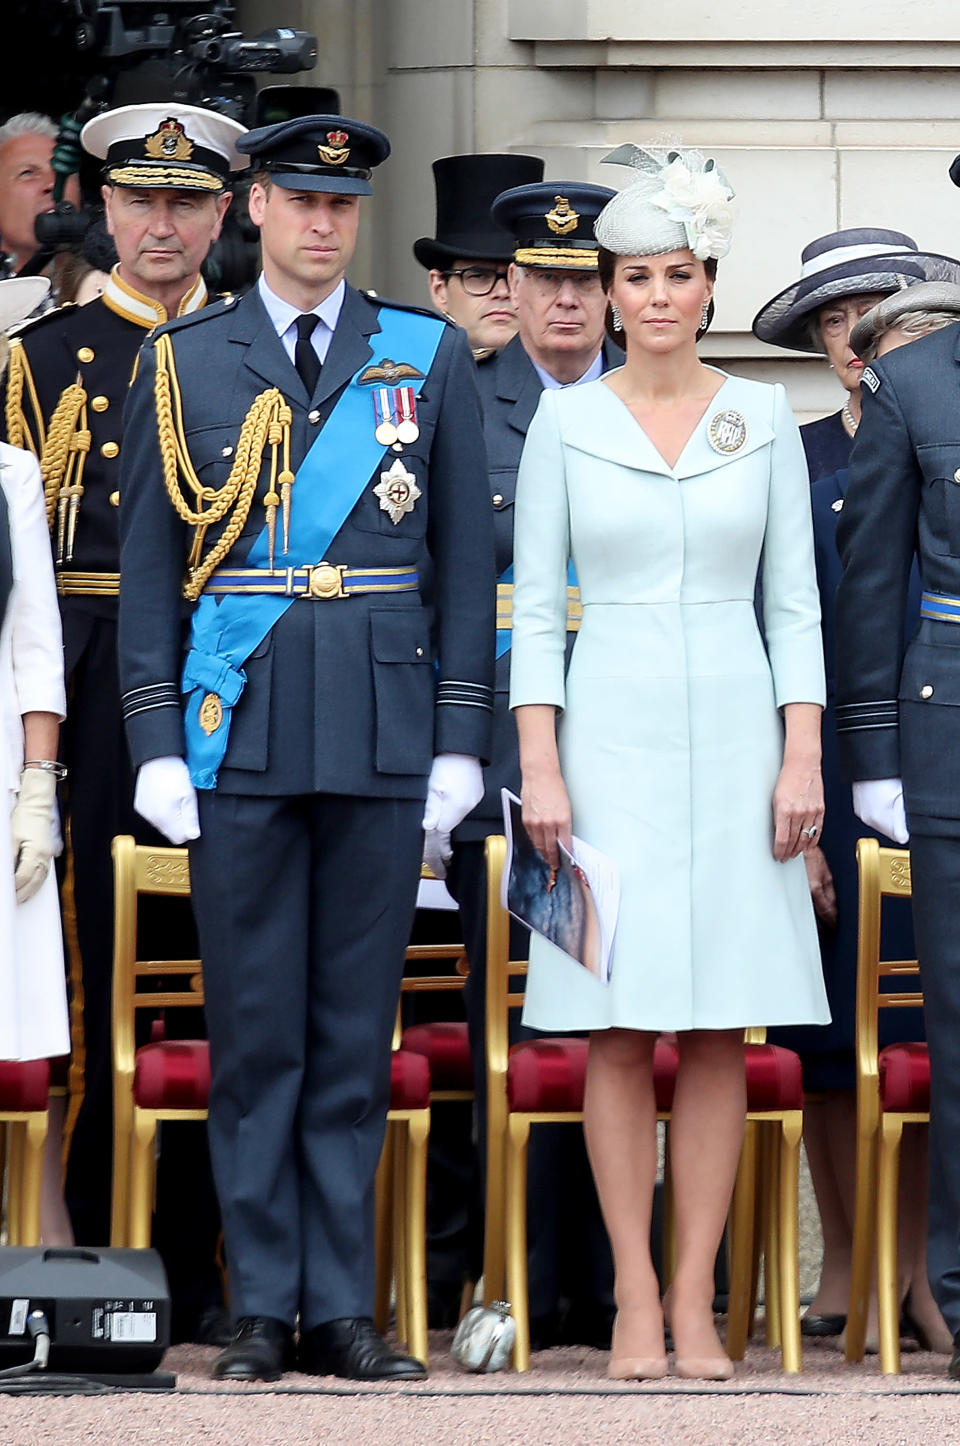 <p>The Duchess of Cambridge wore an ice blue dress by Alexander McQueen for the RAF’s centenary celebrations on July 10, 2018. <em>[Photo: Getty]</em> </p>